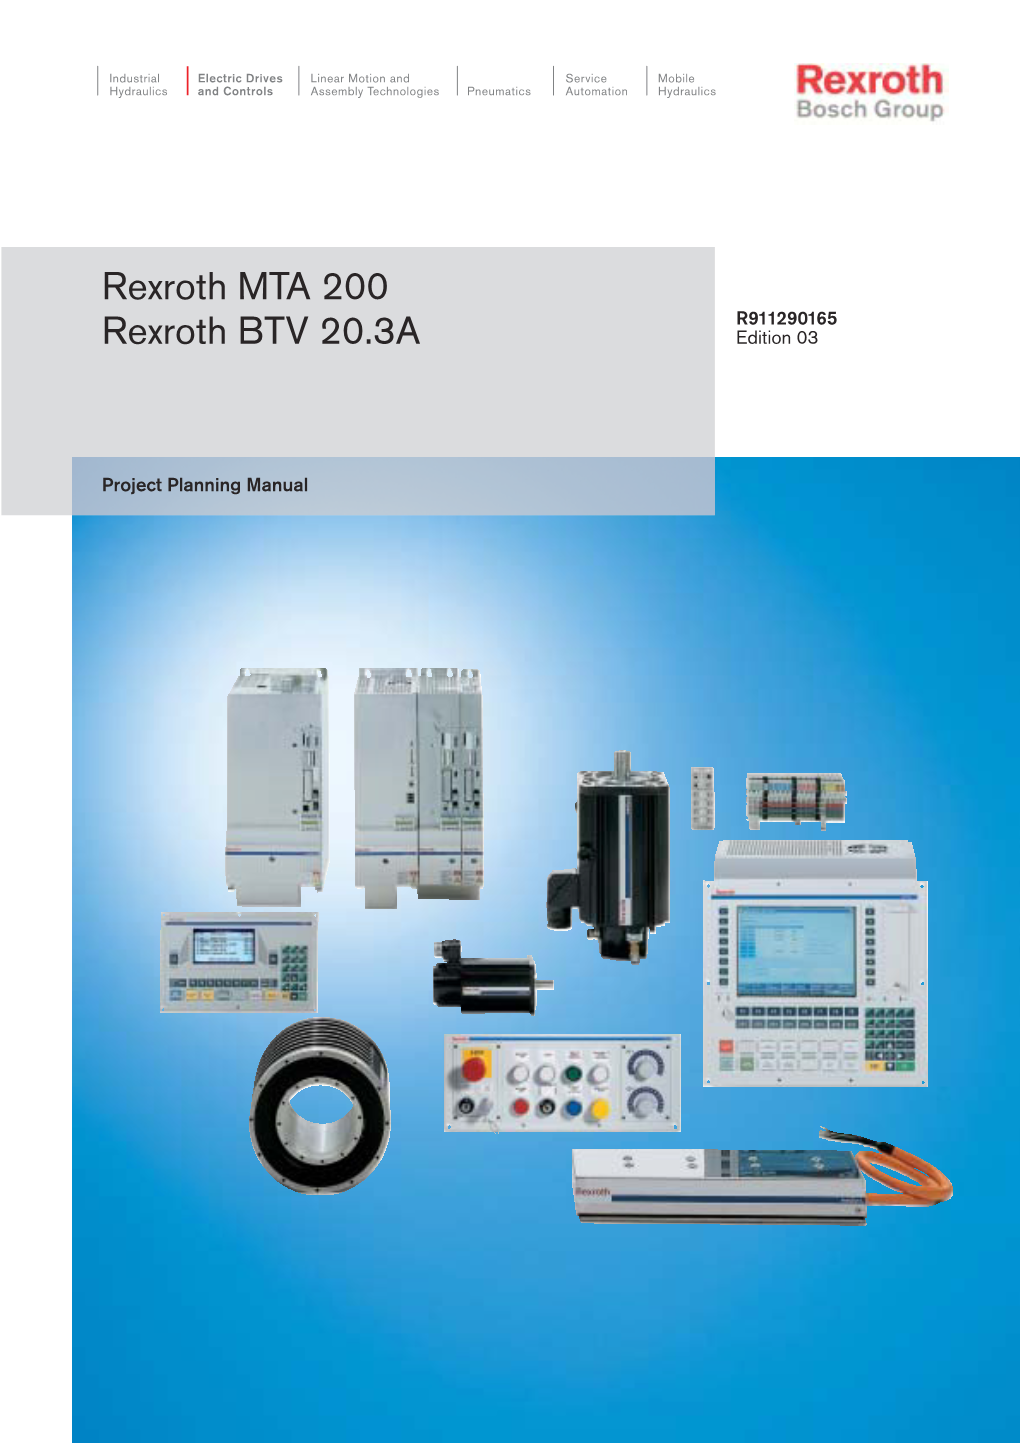 Rexroth MTA 200 Rexroth BTV 20.3A Type of Documentation Project Planning Manual